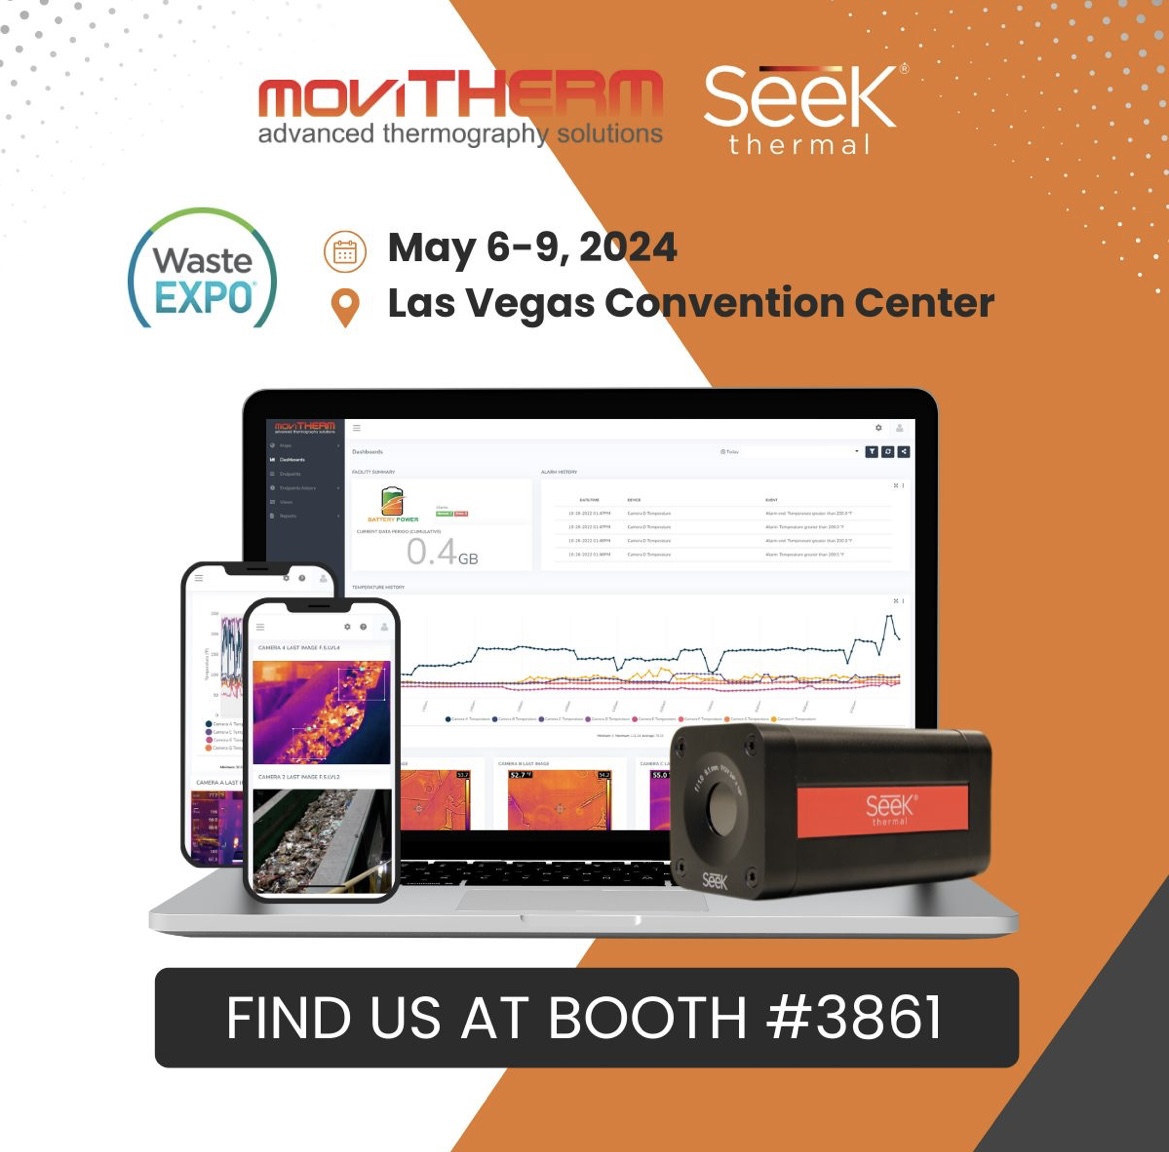 Fired up for WasteExpo 2024! Visit @movitherm and Seek Thermal at booth #3861 to explore our early fire detection system for waste safety. Don't miss special pricing on the Thermal Monitoring Starter Pack! 🔥